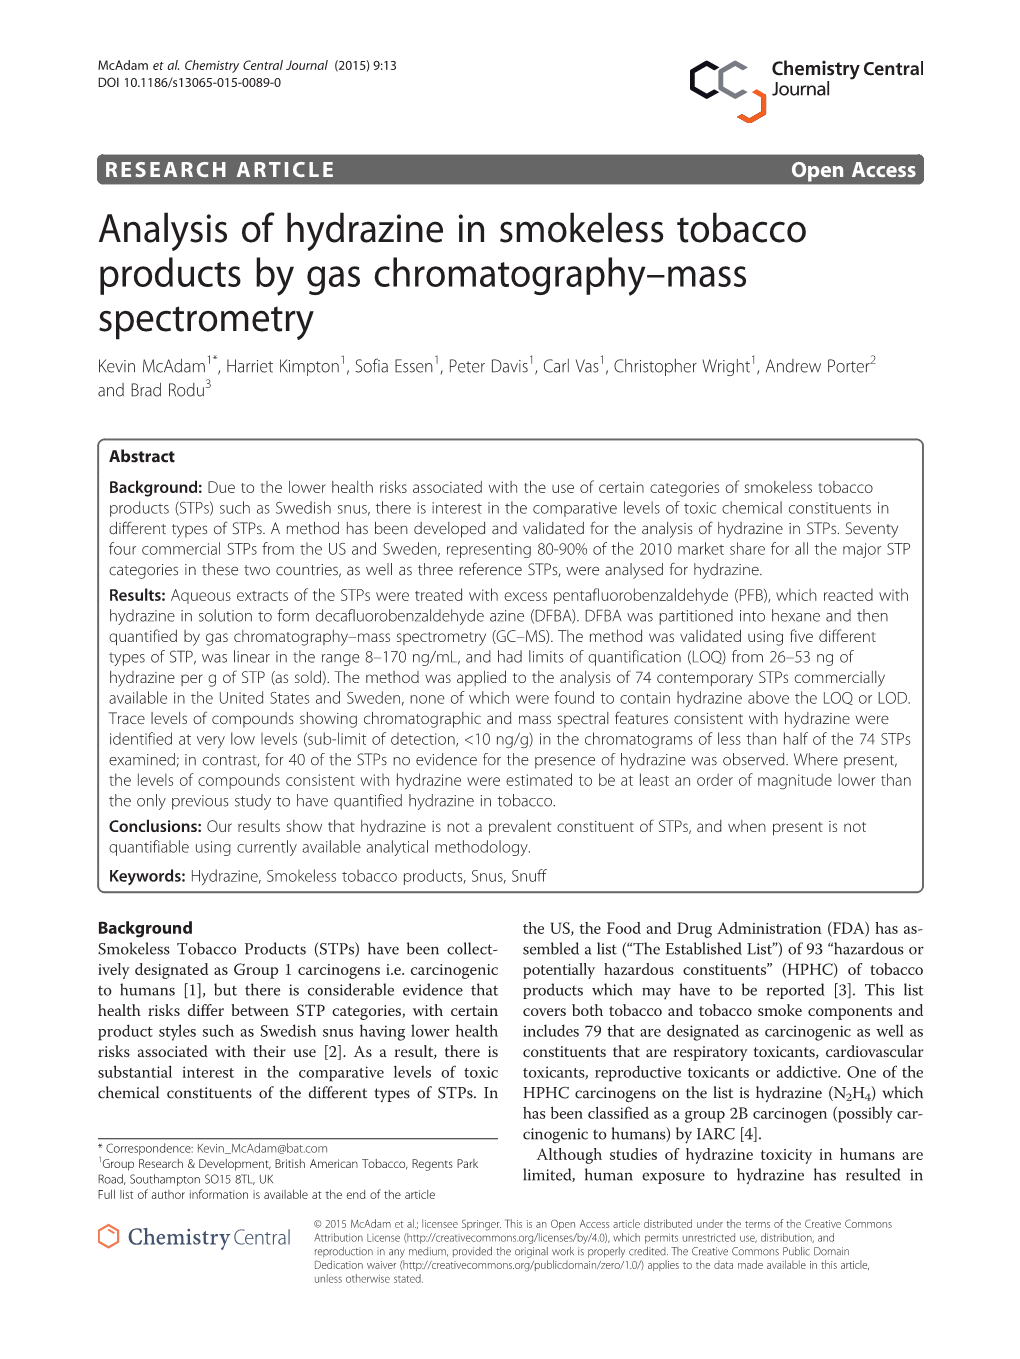 Analysis of Hydrazine in Smokeless Tobacco Products